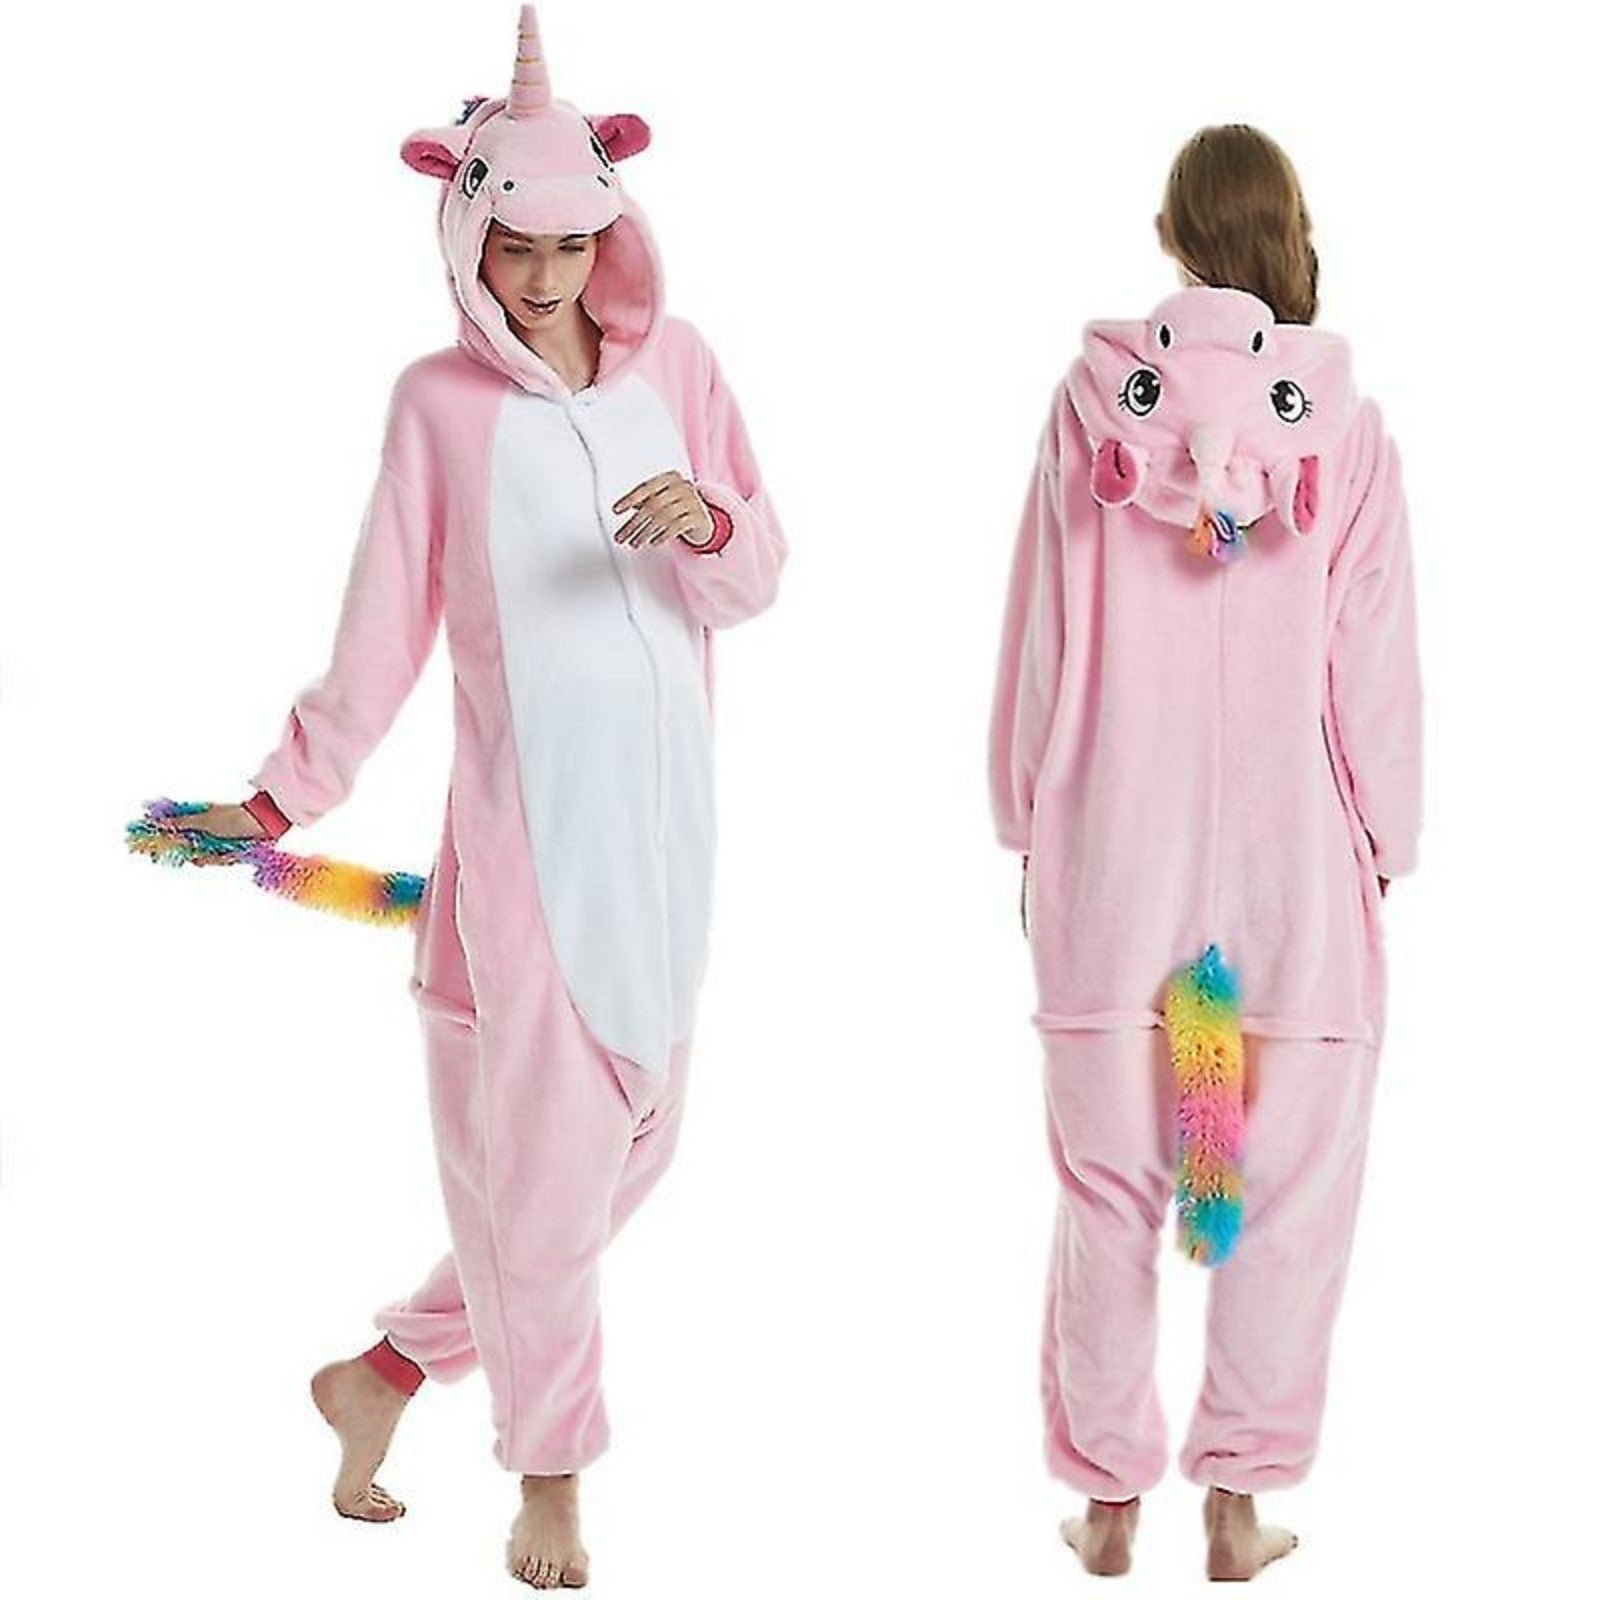 Pink Unicorn Costume Halloween Outfit Pajamas SMALL and